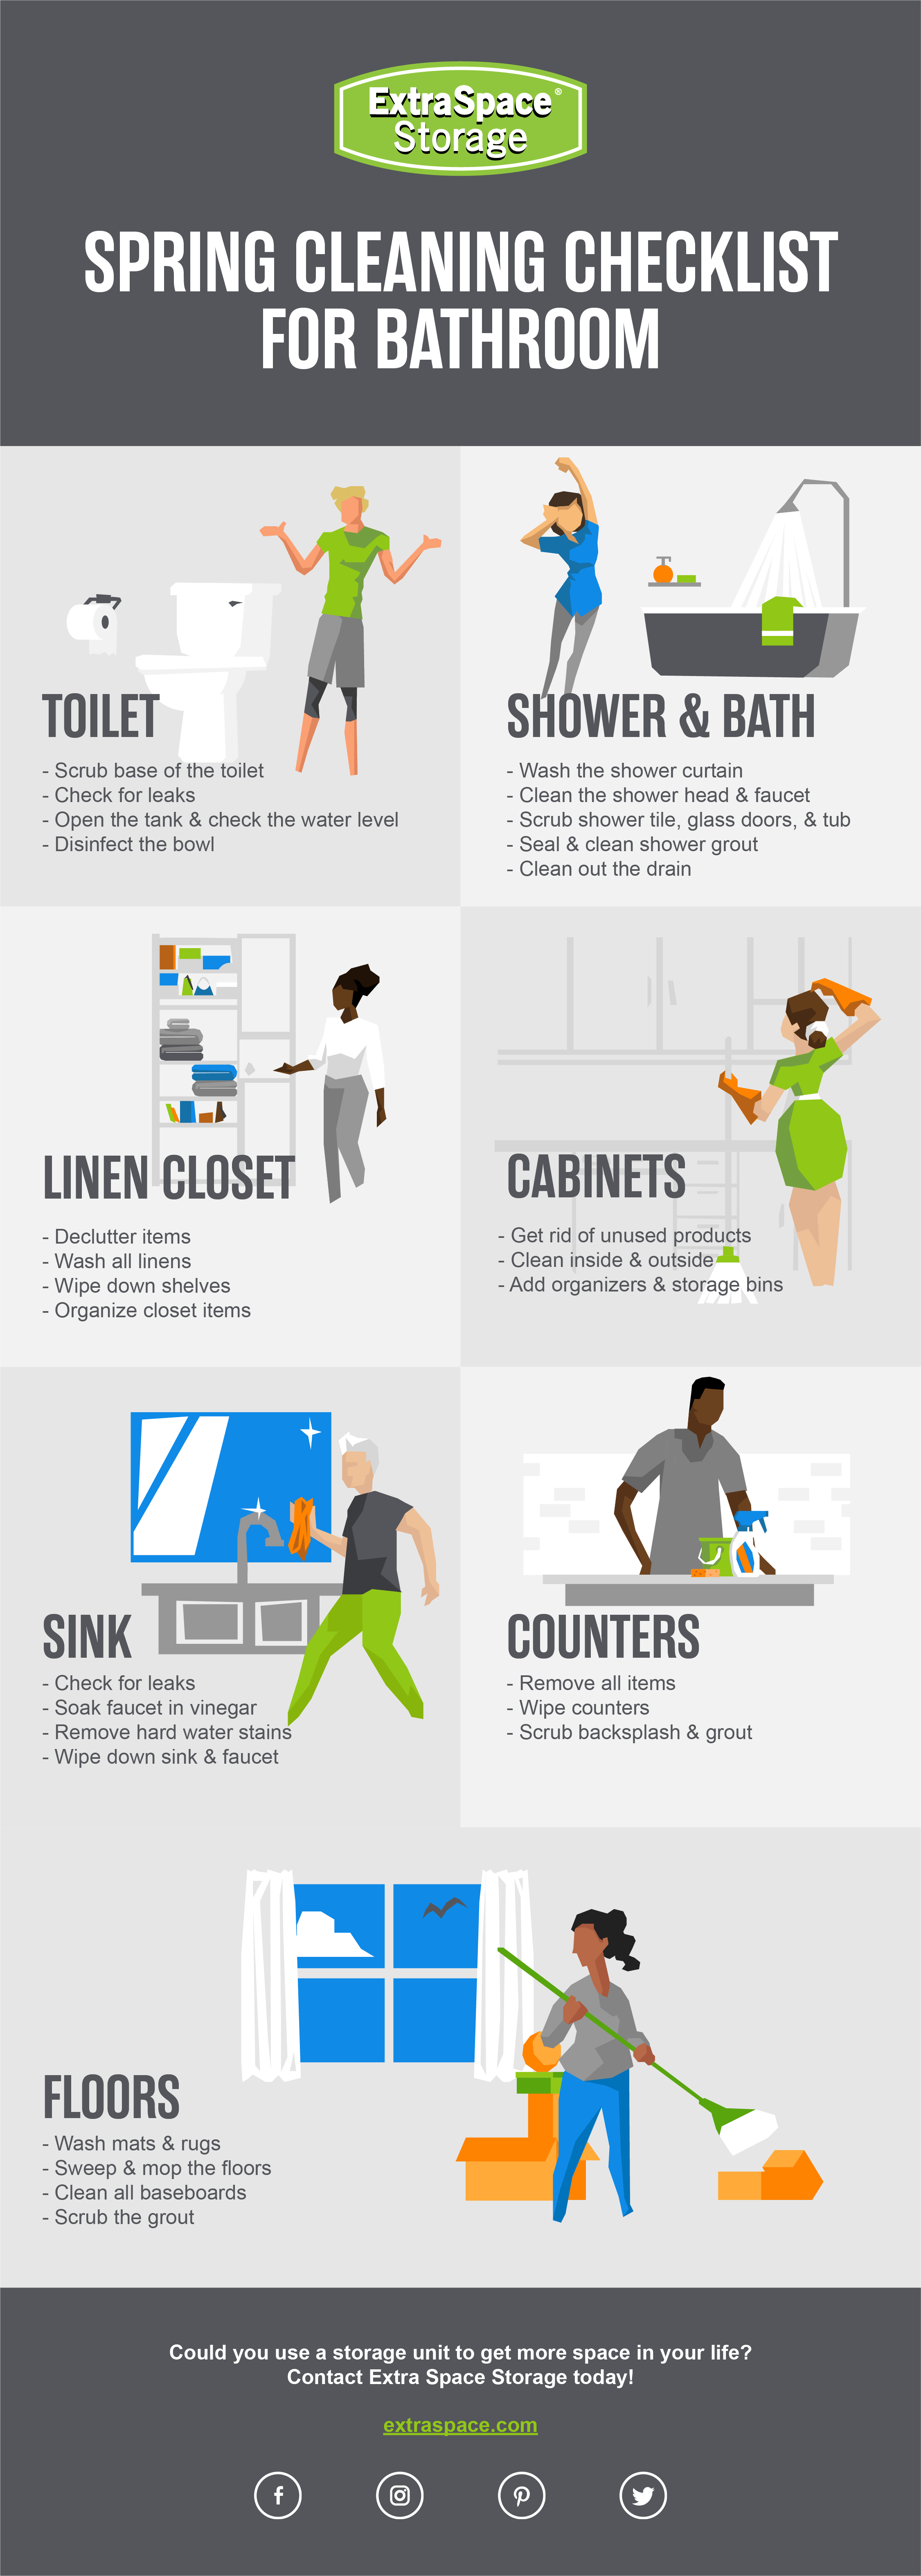 Infographic: Spring Cleaning Checklist for Bathroom